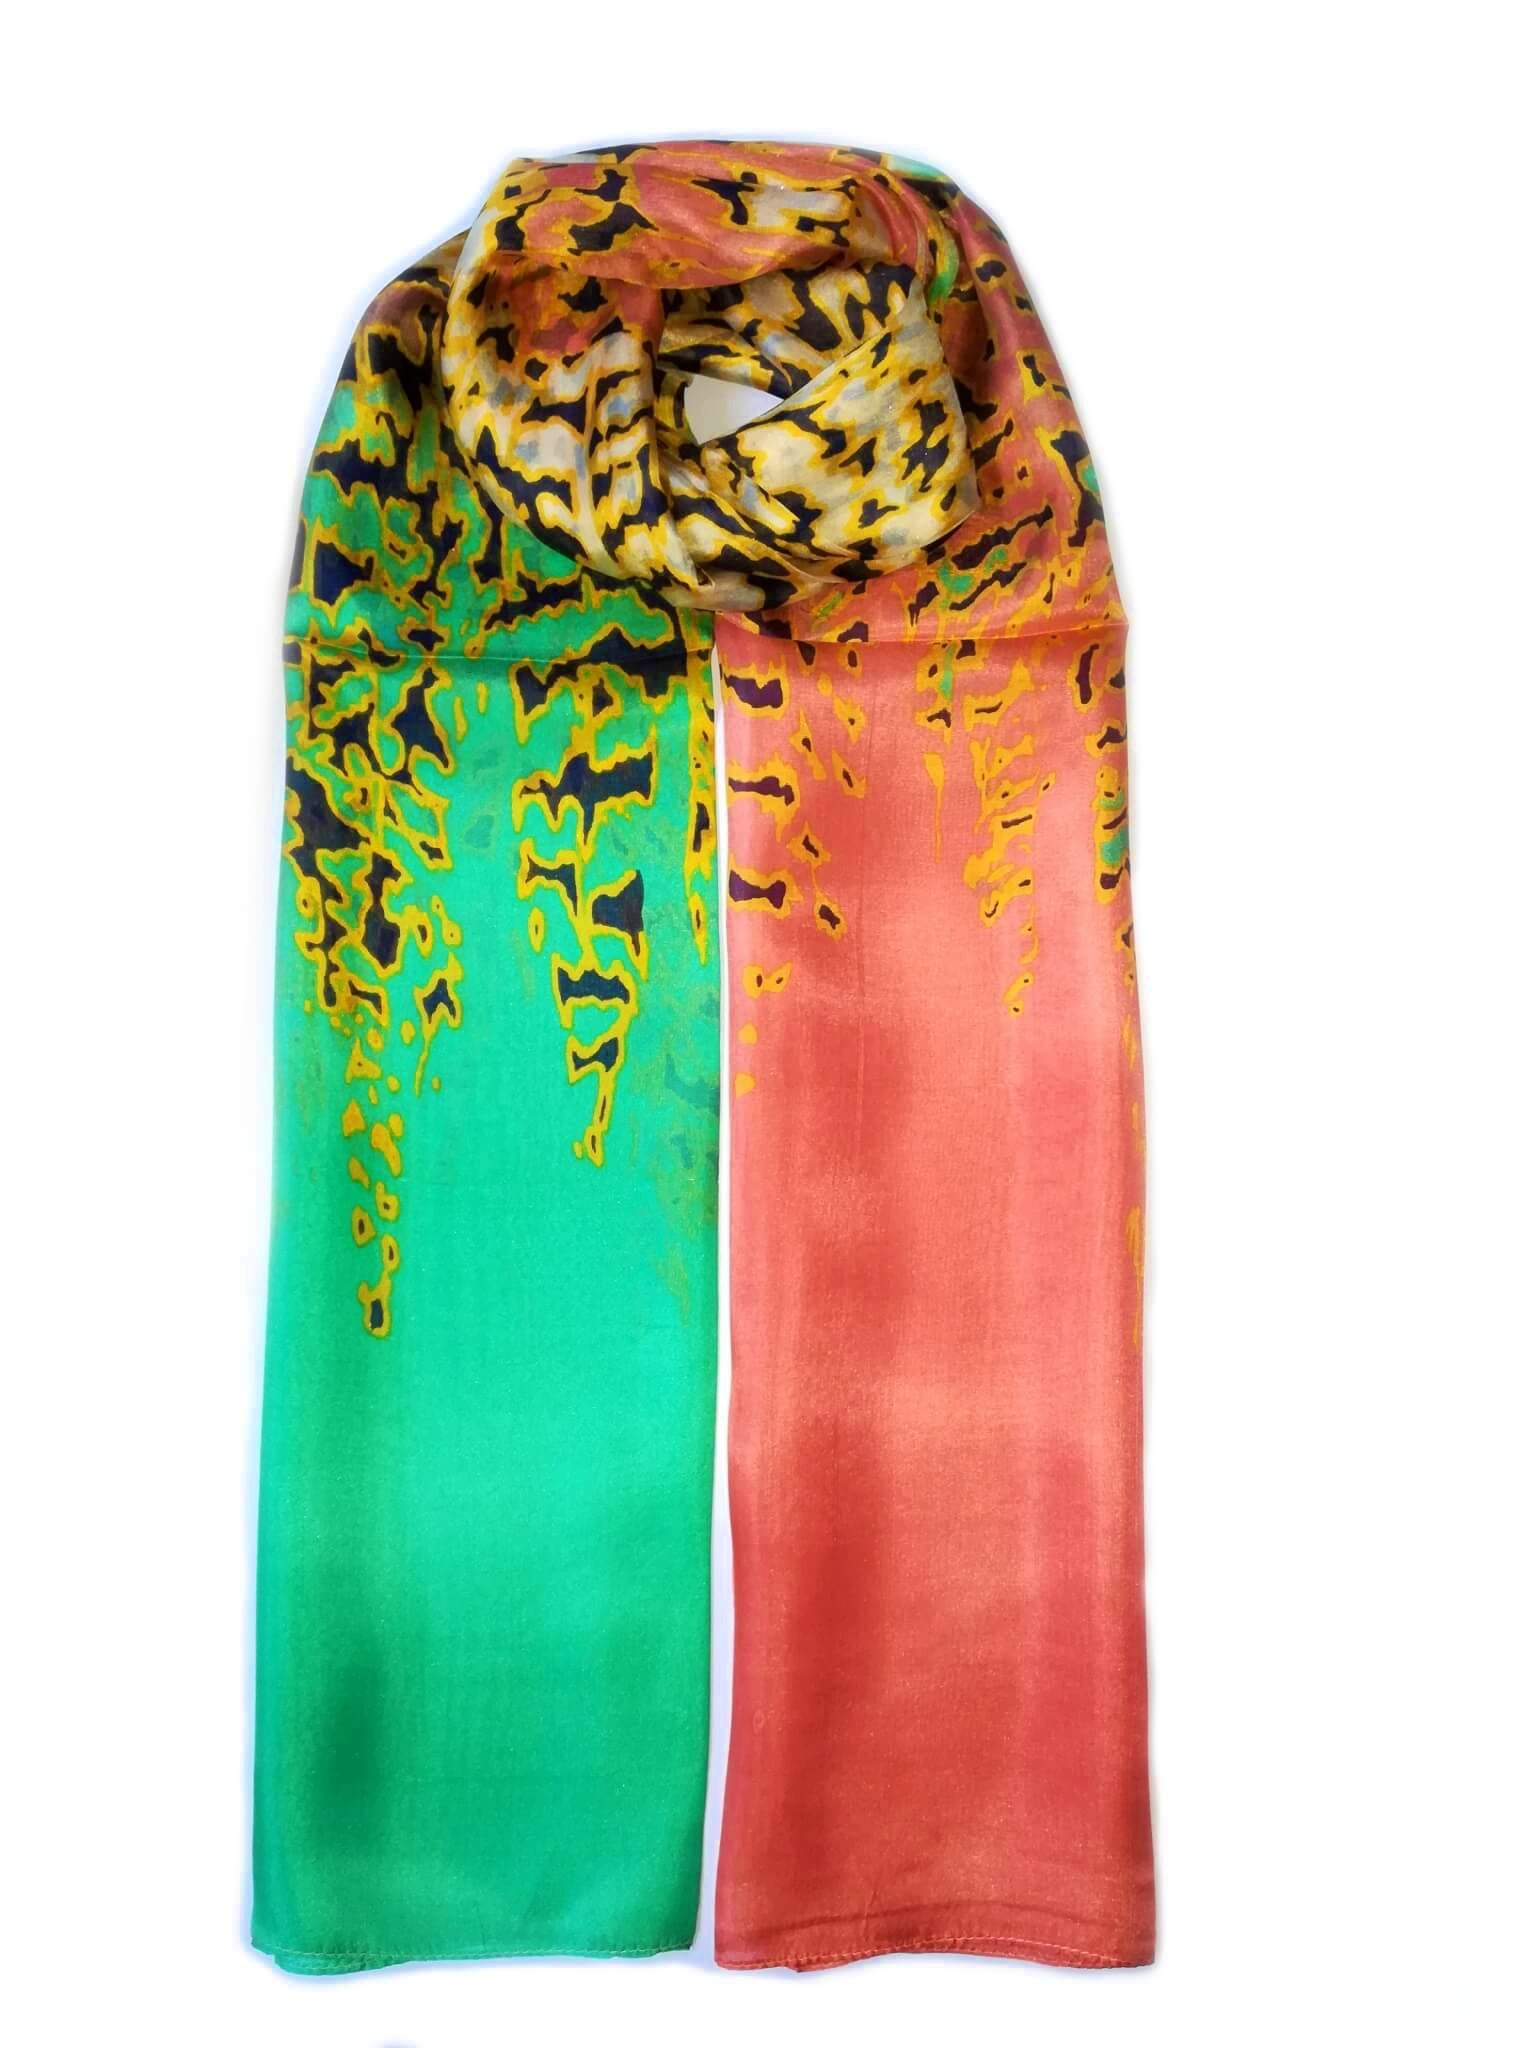 Large Silk Scarf Leopard Yellow and Green - Vshine Silk and Shine Fashion Accessories